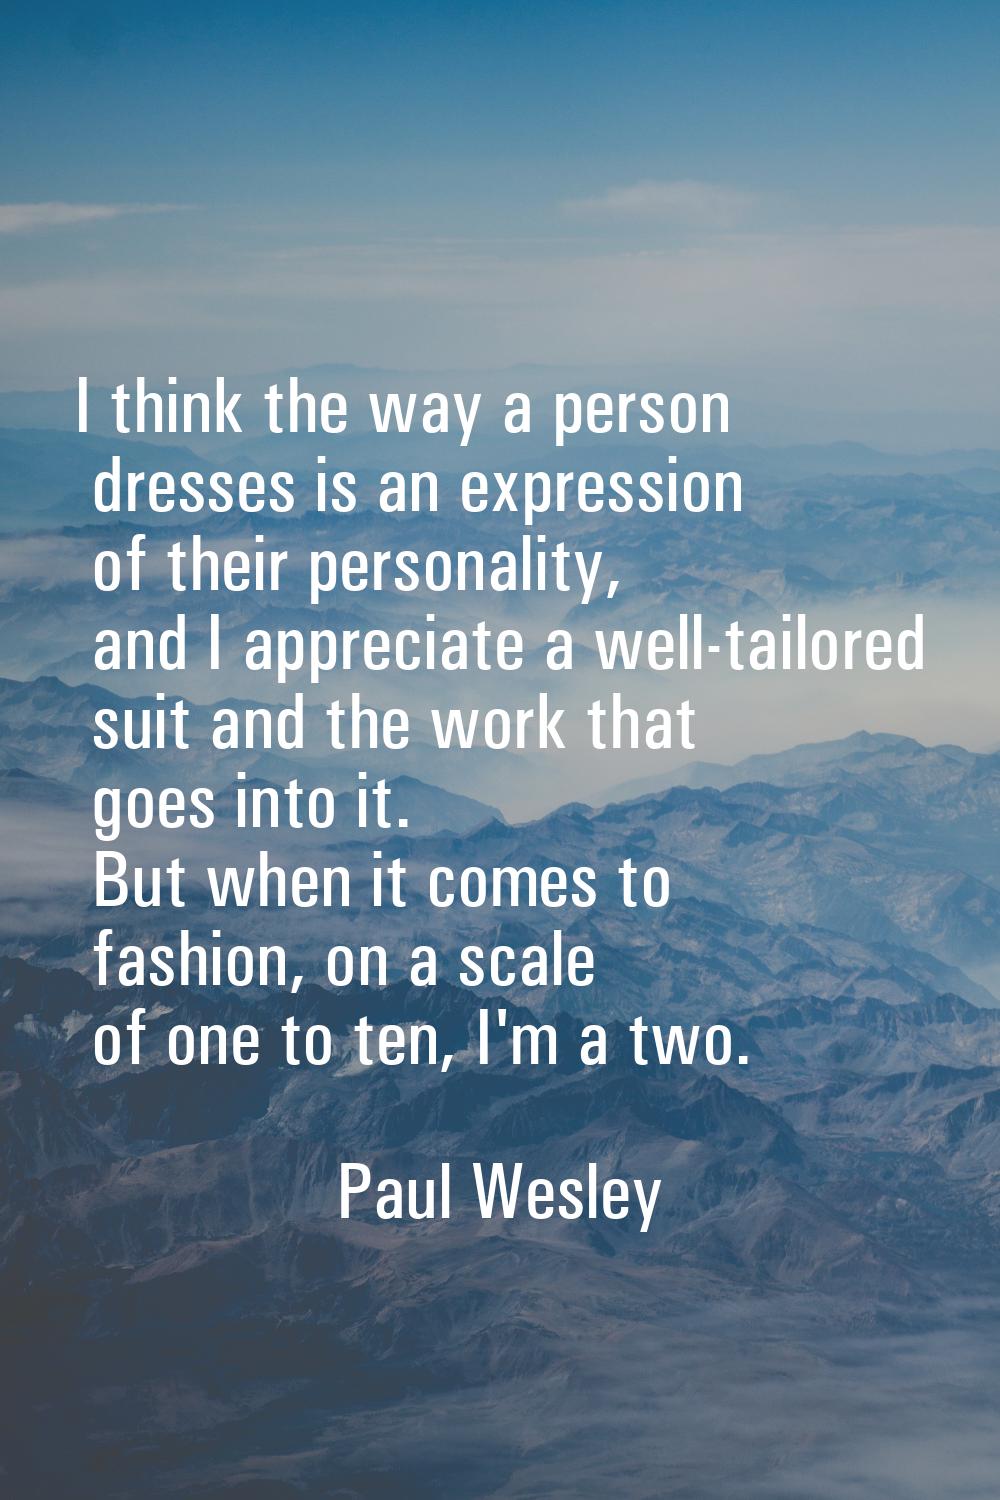 I think the way a person dresses is an expression of their personality, and I appreciate a well-tai